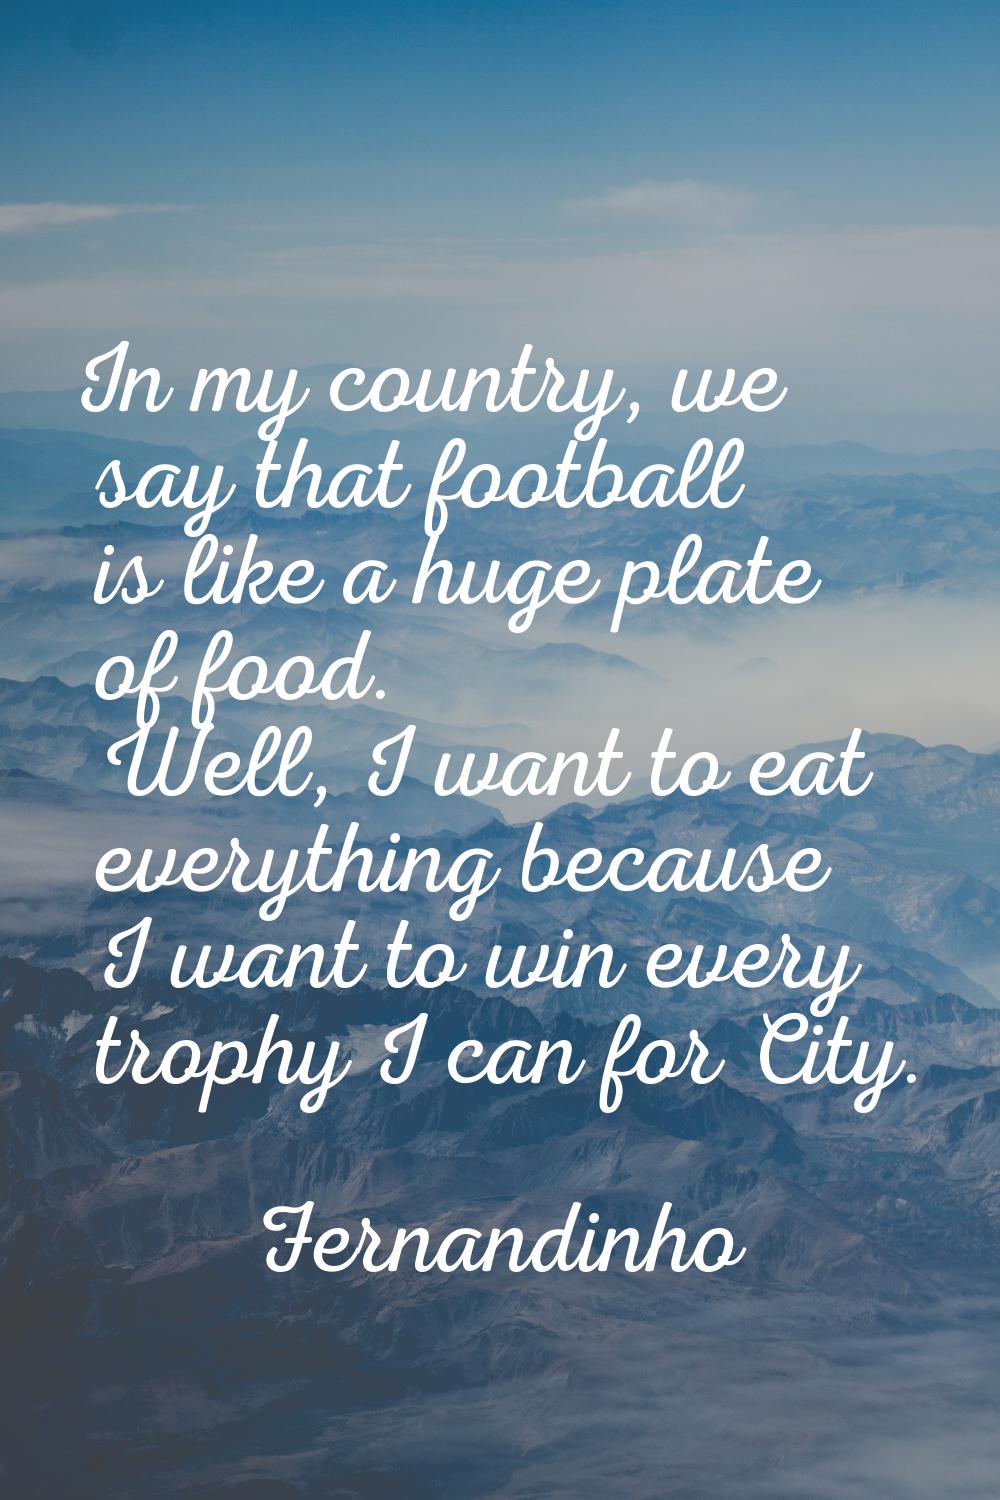 In my country, we say that football is like a huge plate of food. Well, I want to eat everything be